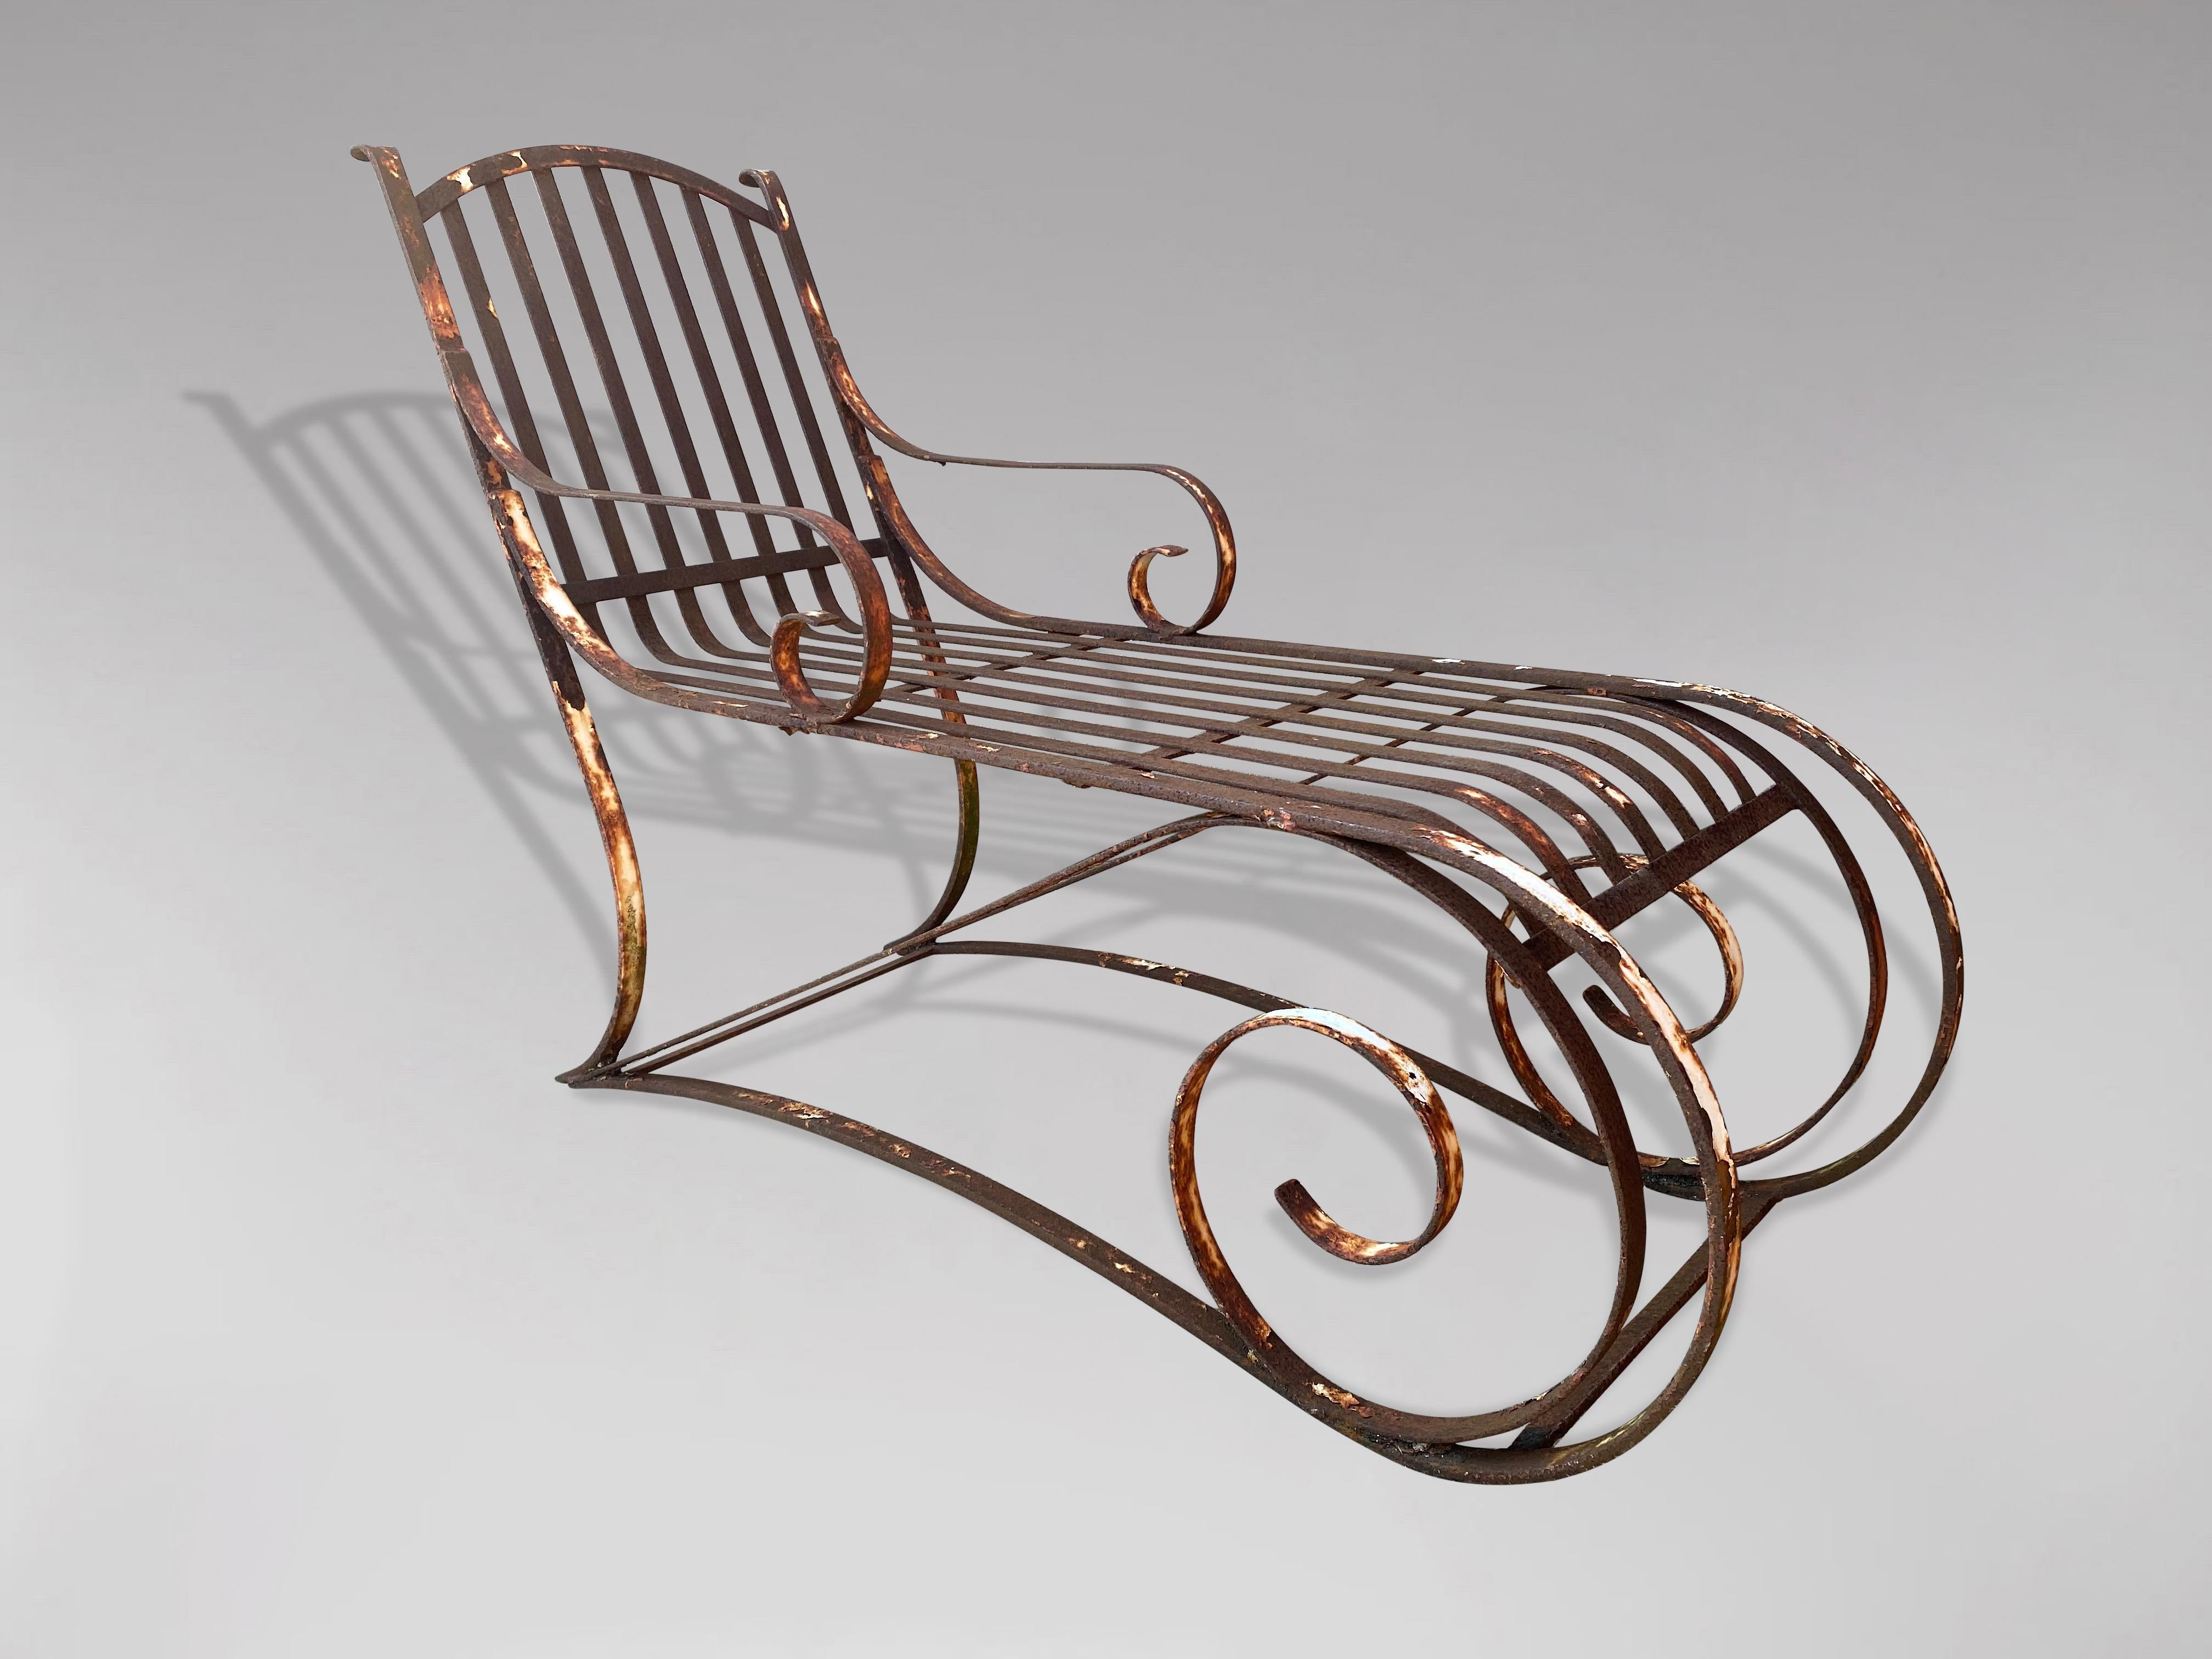 Hand-Crafted 19th Century Wrought Iron Chaise Longue Lounger